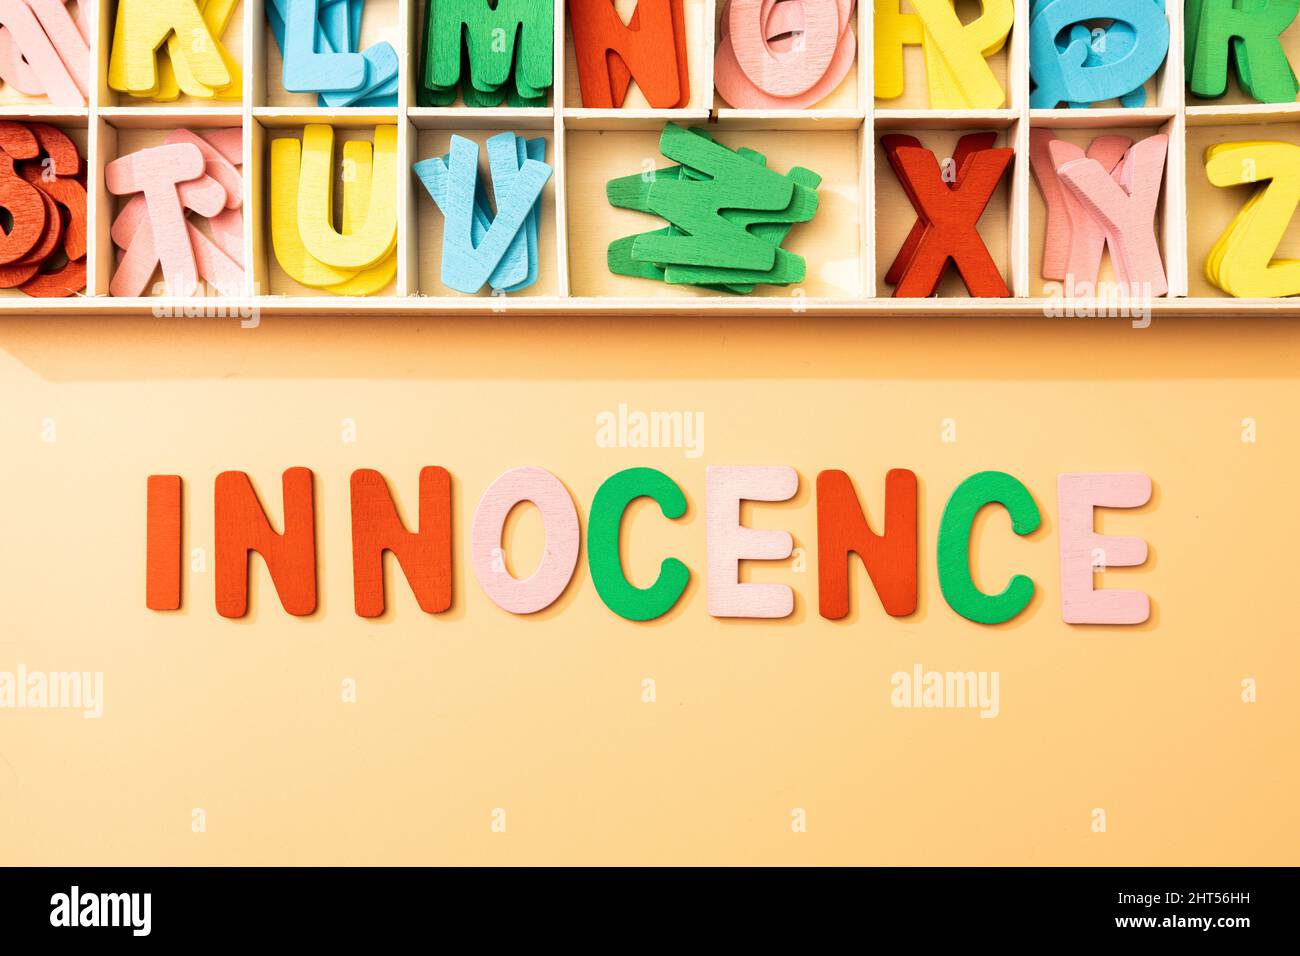 the word innocence represented as a concept by wooden color letters over a background Stock Photo